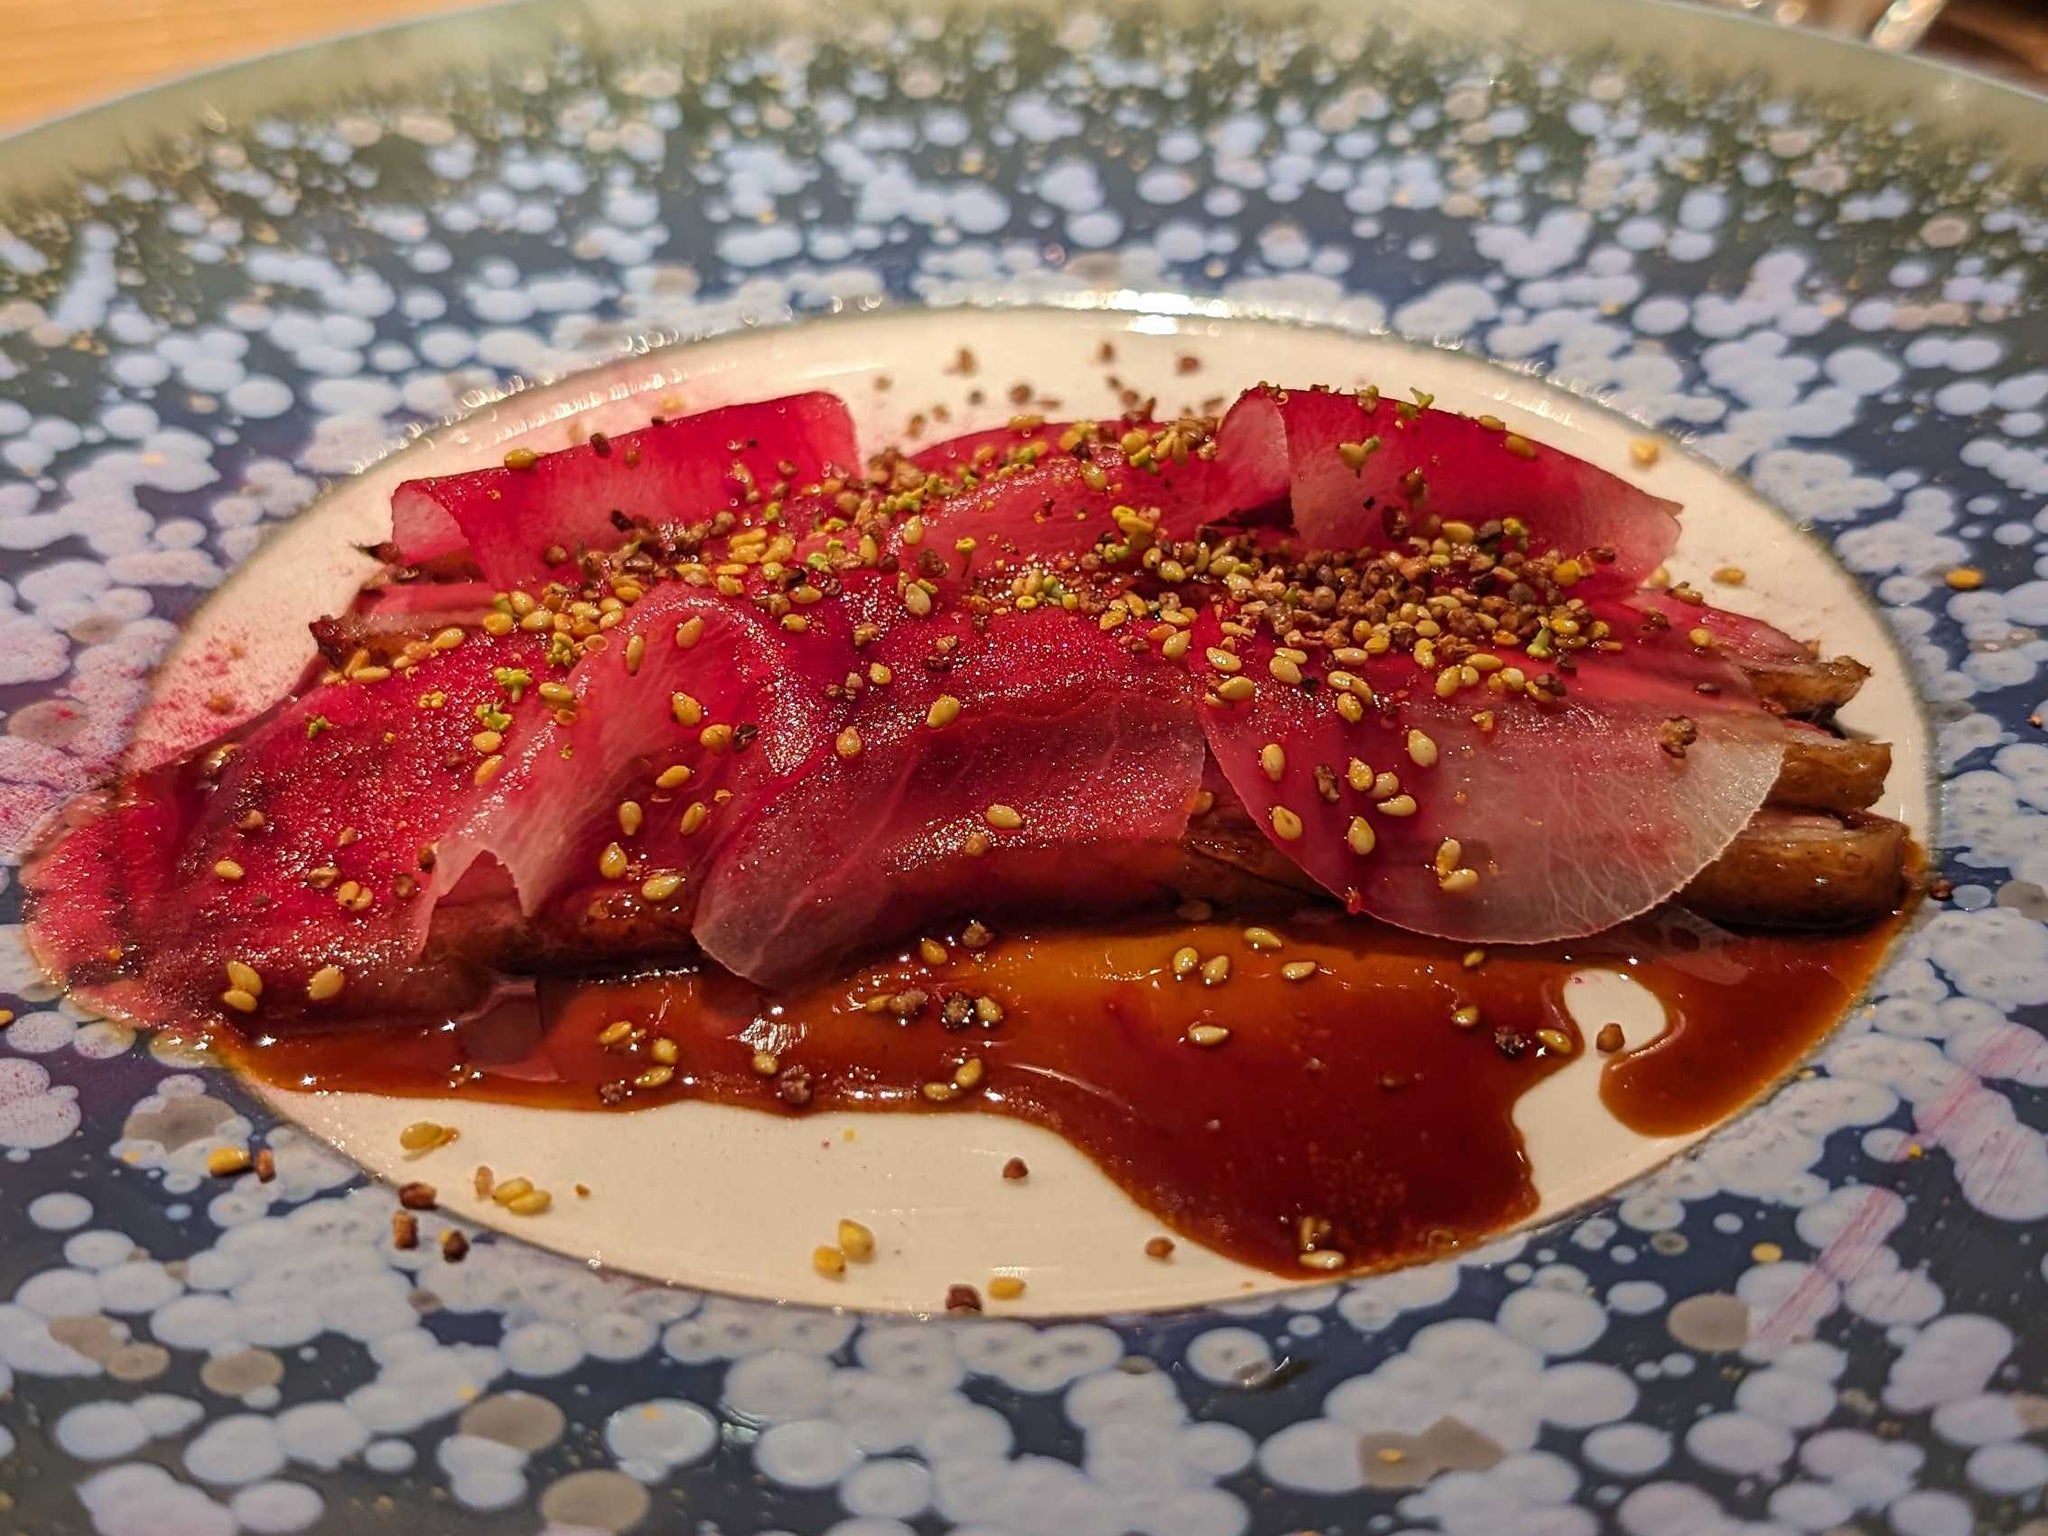 Roasted duck magret with marinated daikon radishes is a dish that cannot be missed